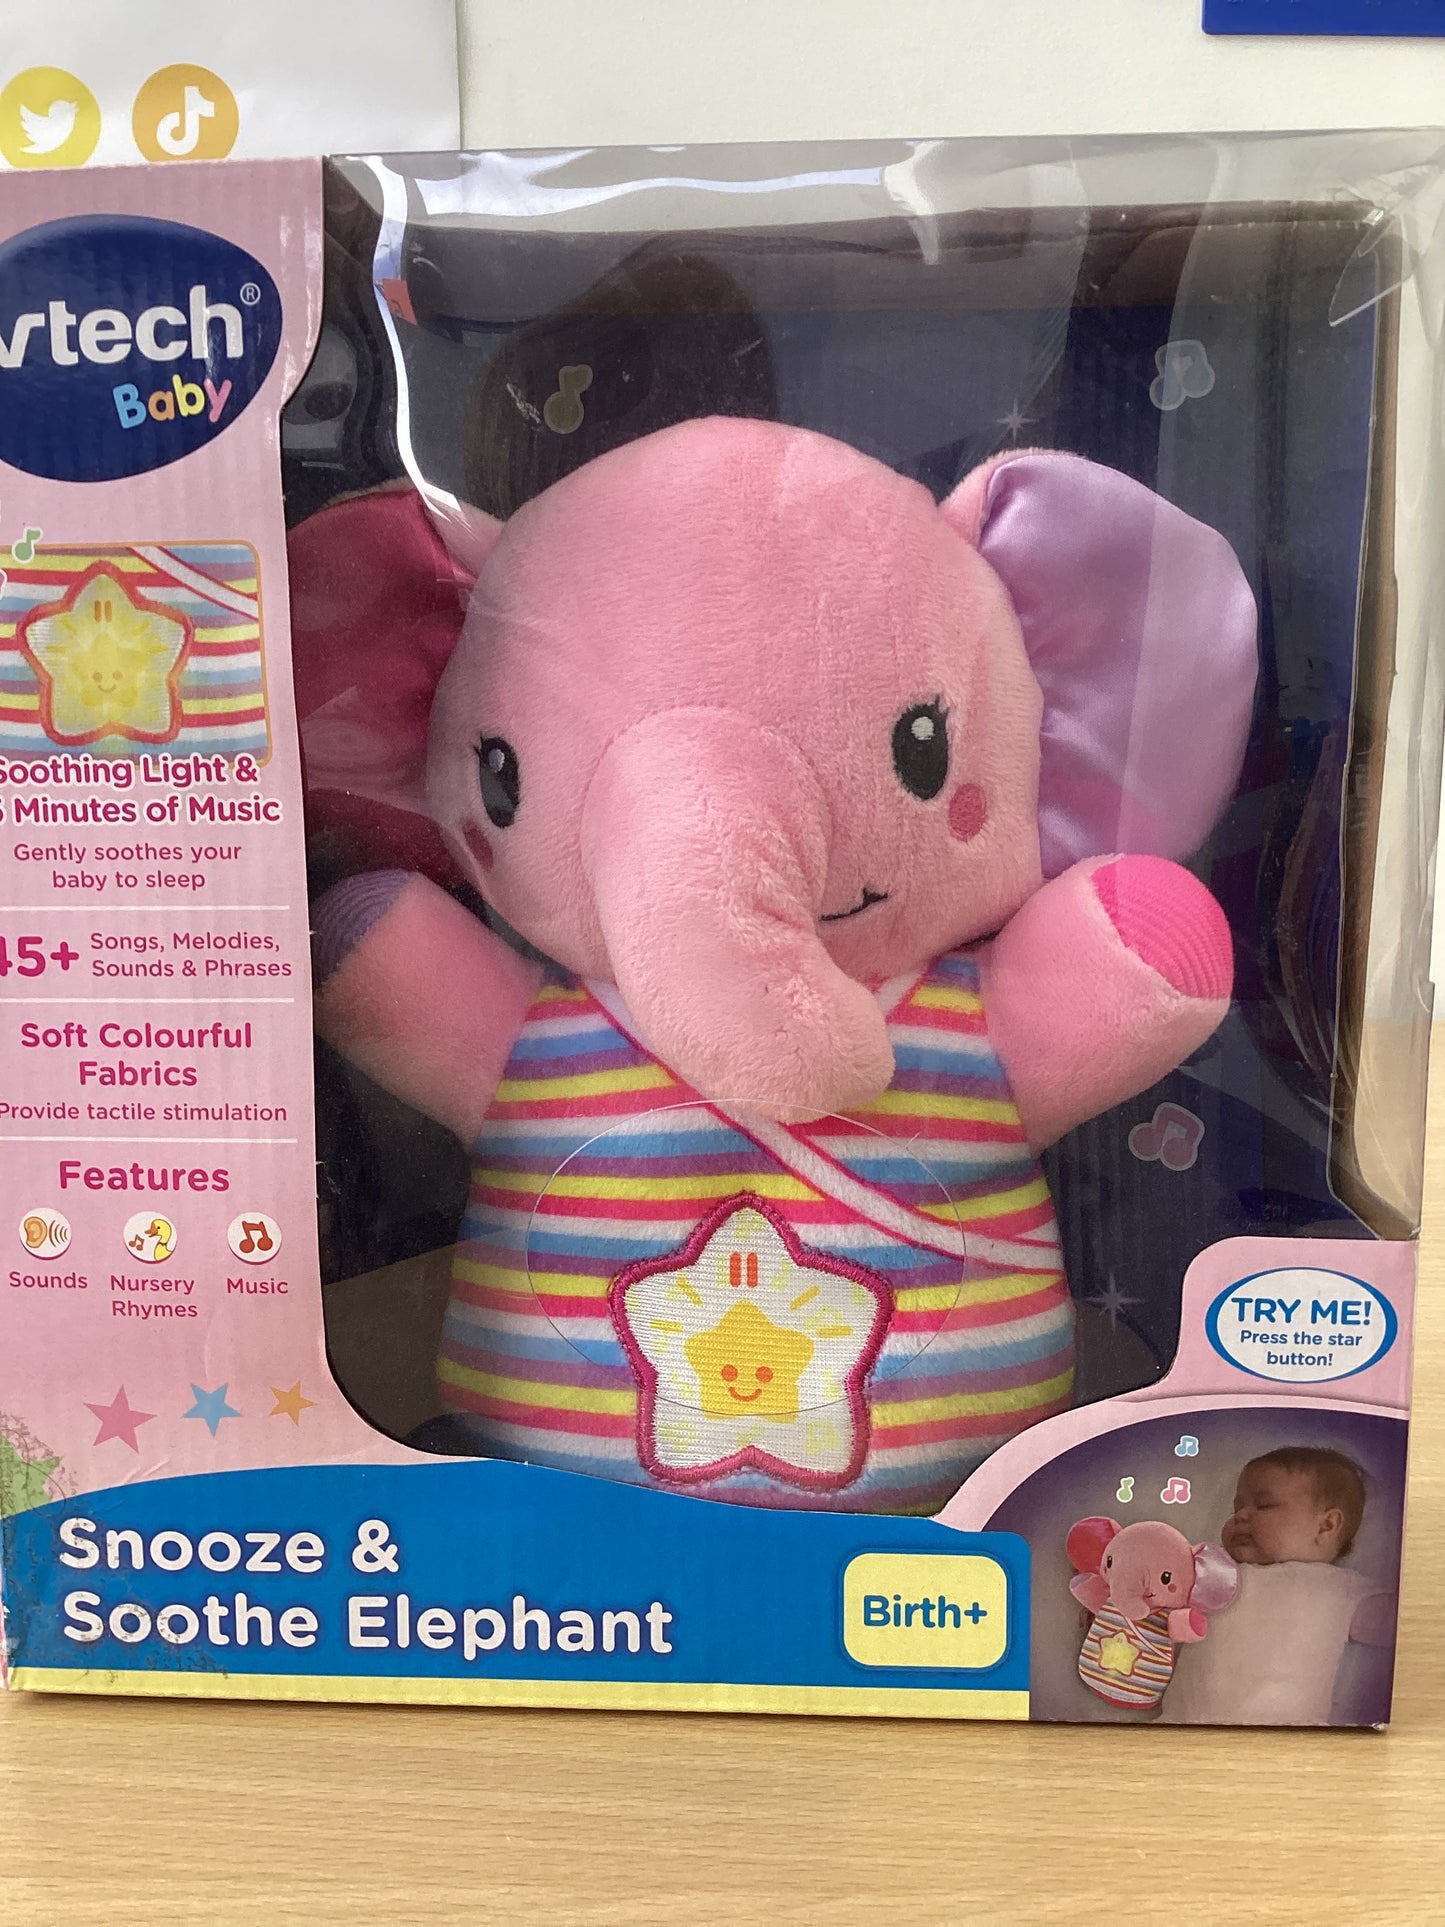 Snooze & Soothe Elephant